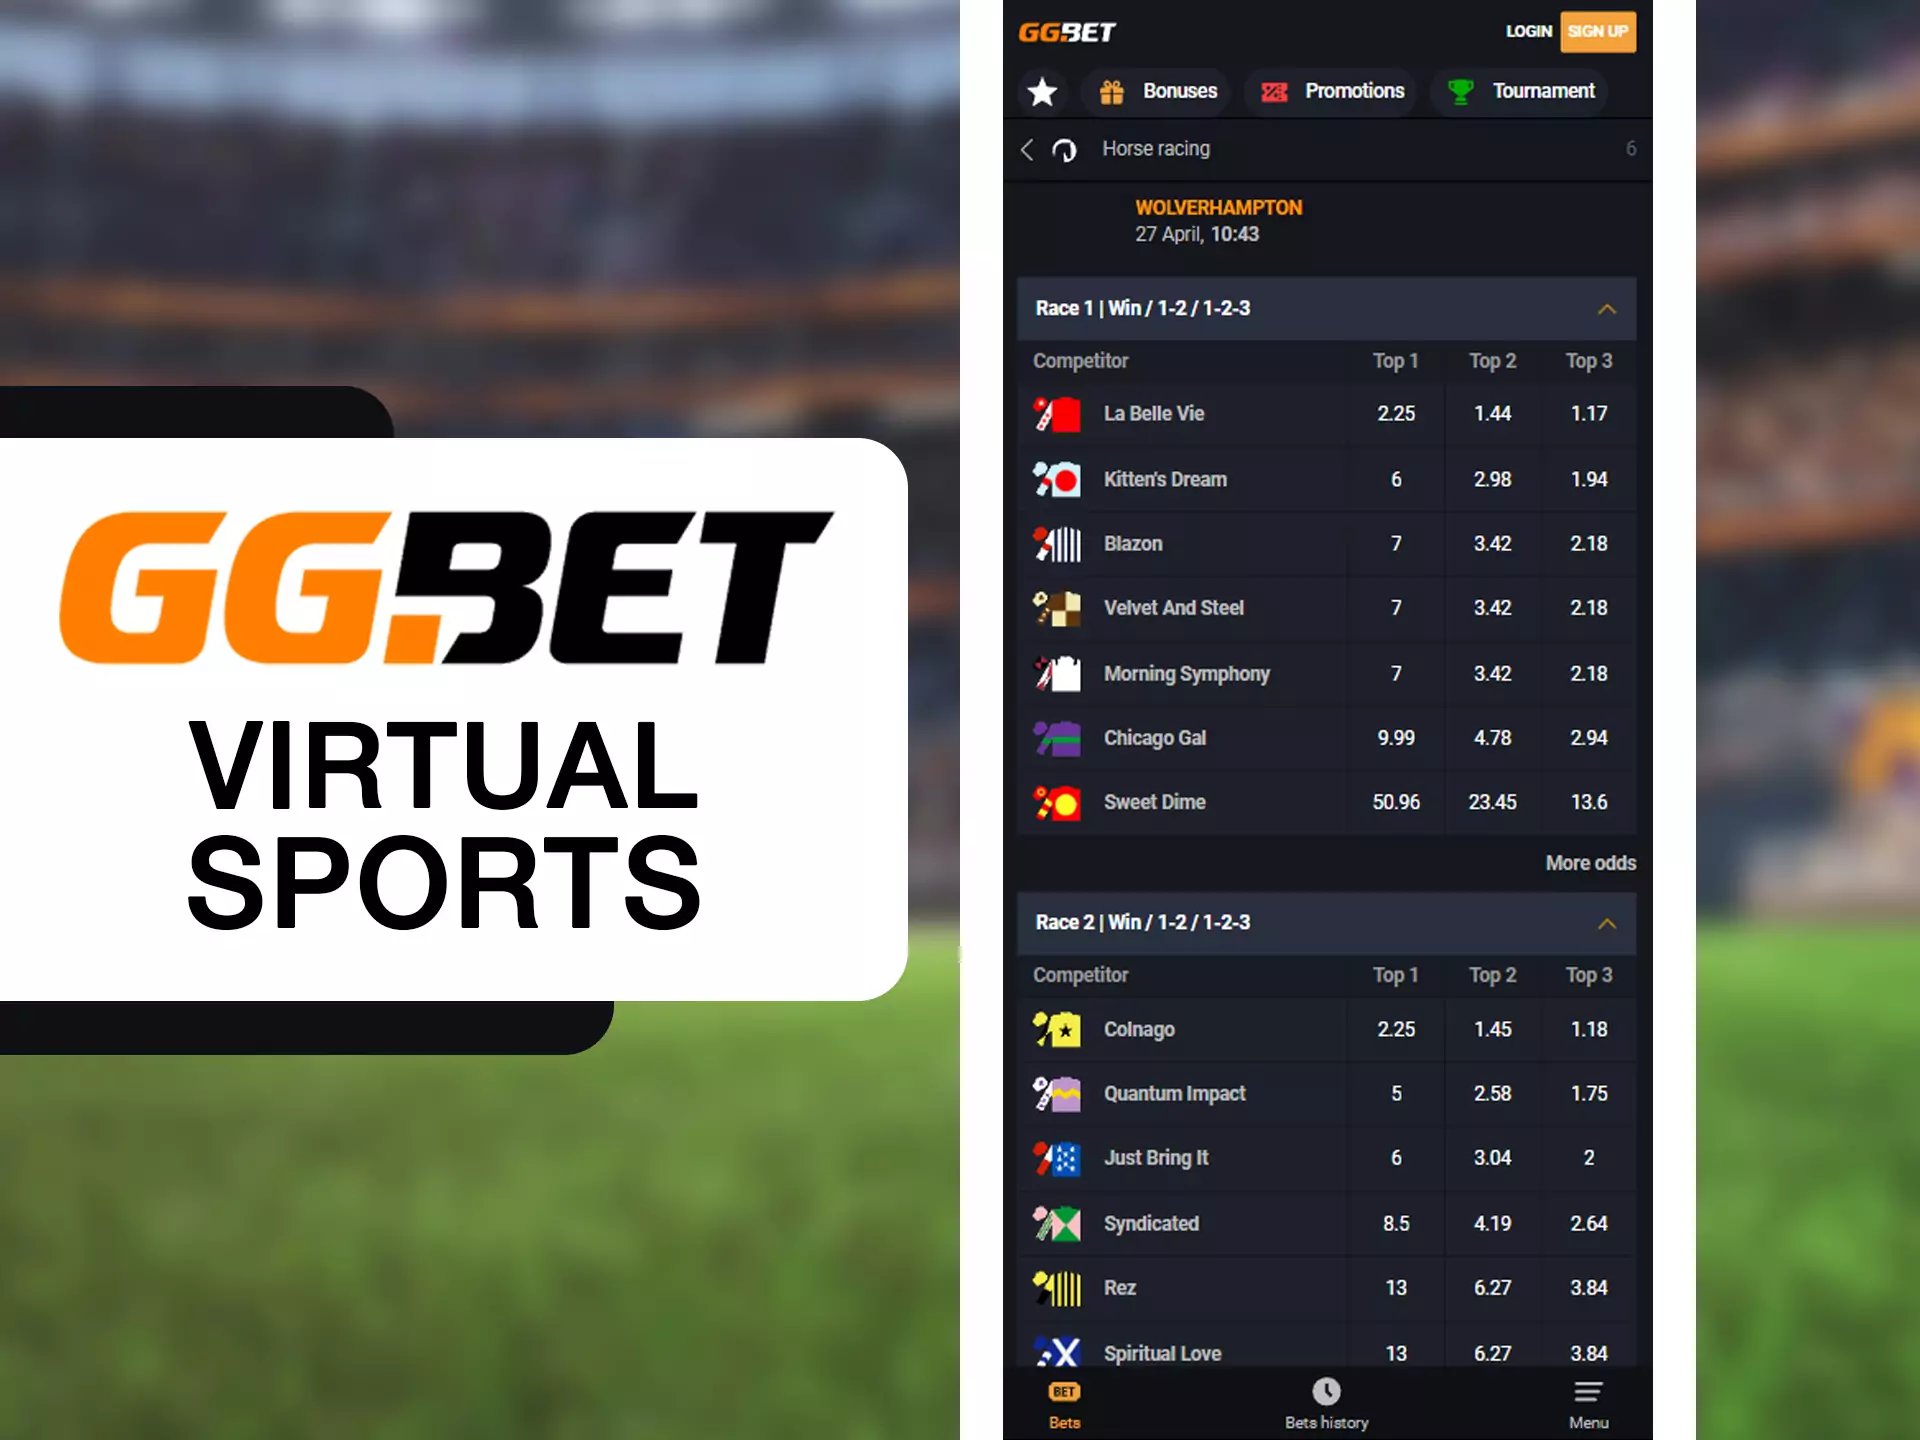 Watch and bet on different virtual sports using GGBet app.